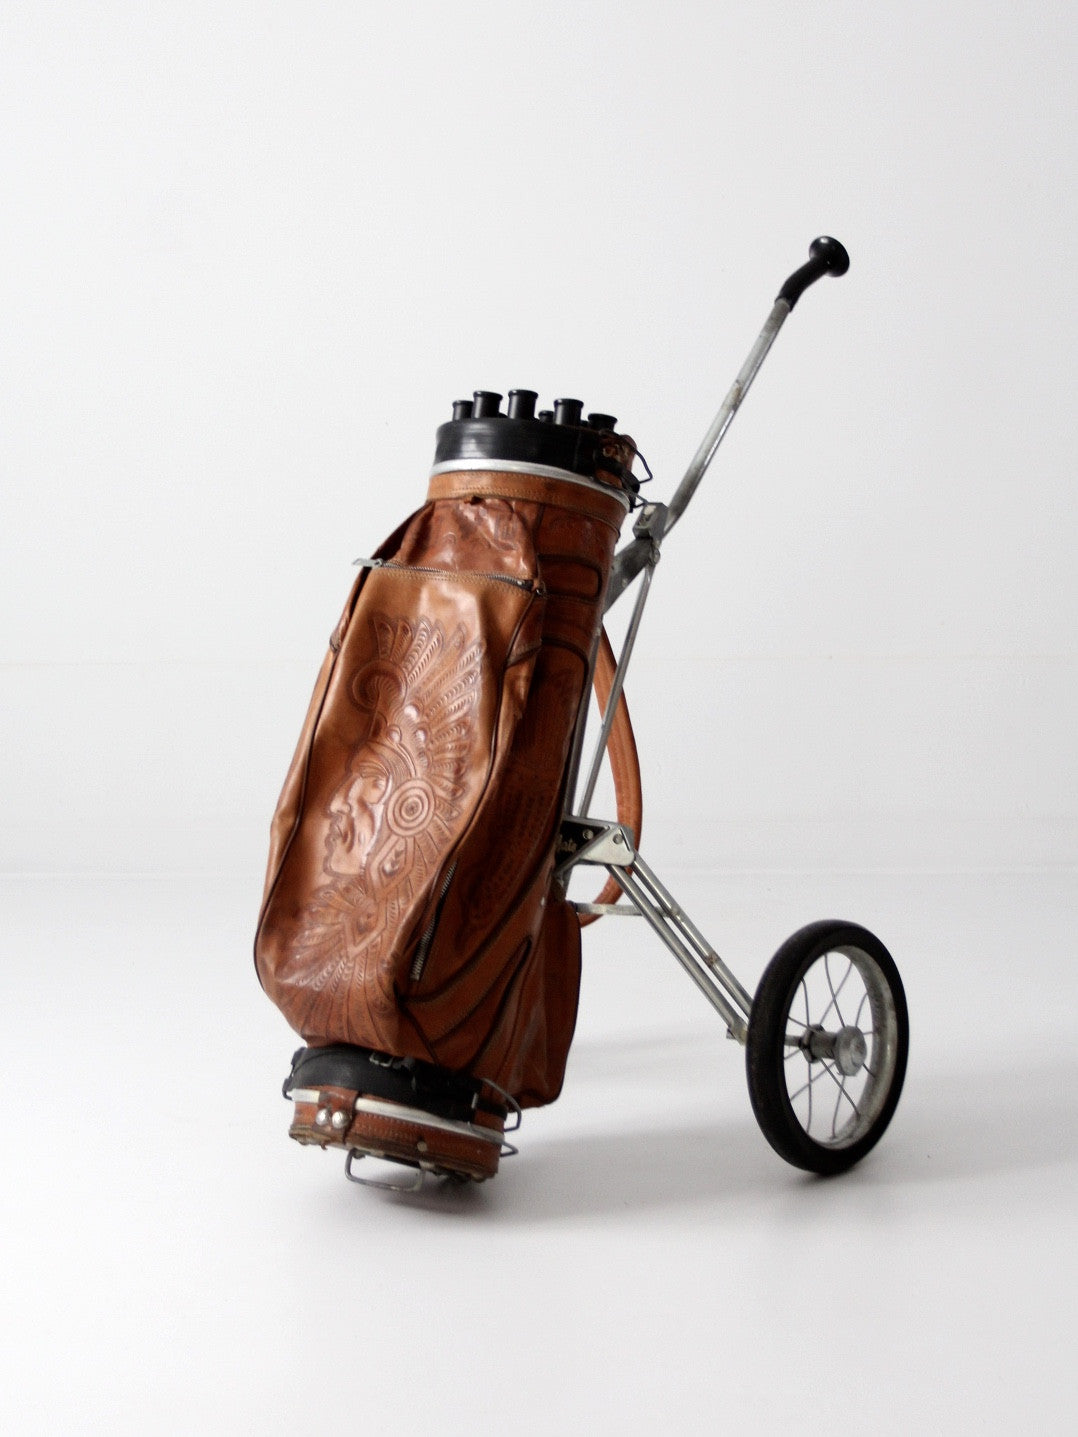 Best Vintage Leather Golf Bag And Clubs for sale in Huntersville